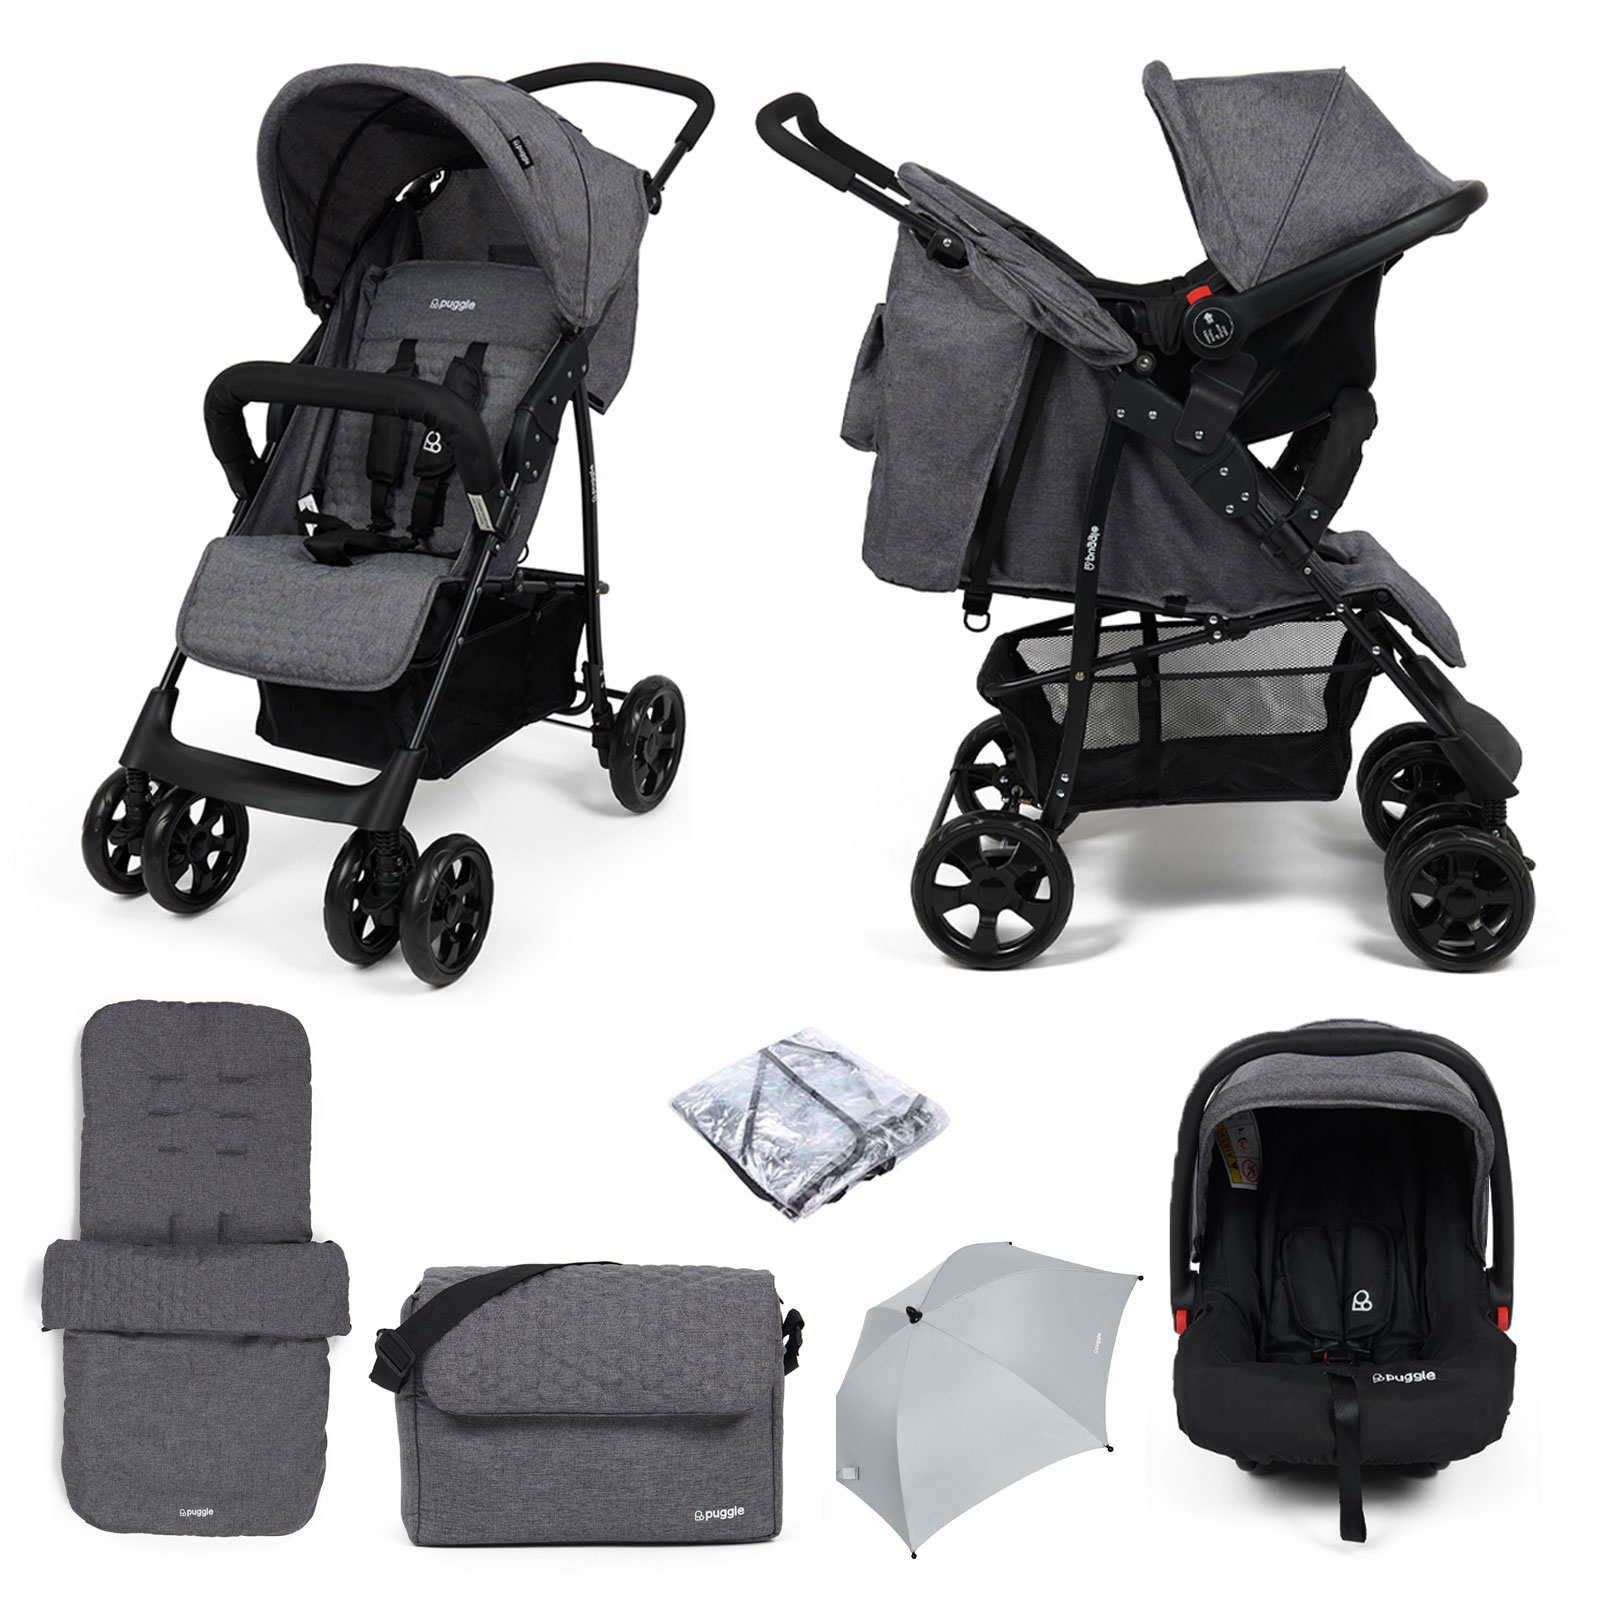 Puggle Lowton Luxe 2in1 Travel System with Raincover, Universal Honeycomb Footmuff, Changing Bag & Parasol – Graphite Grey